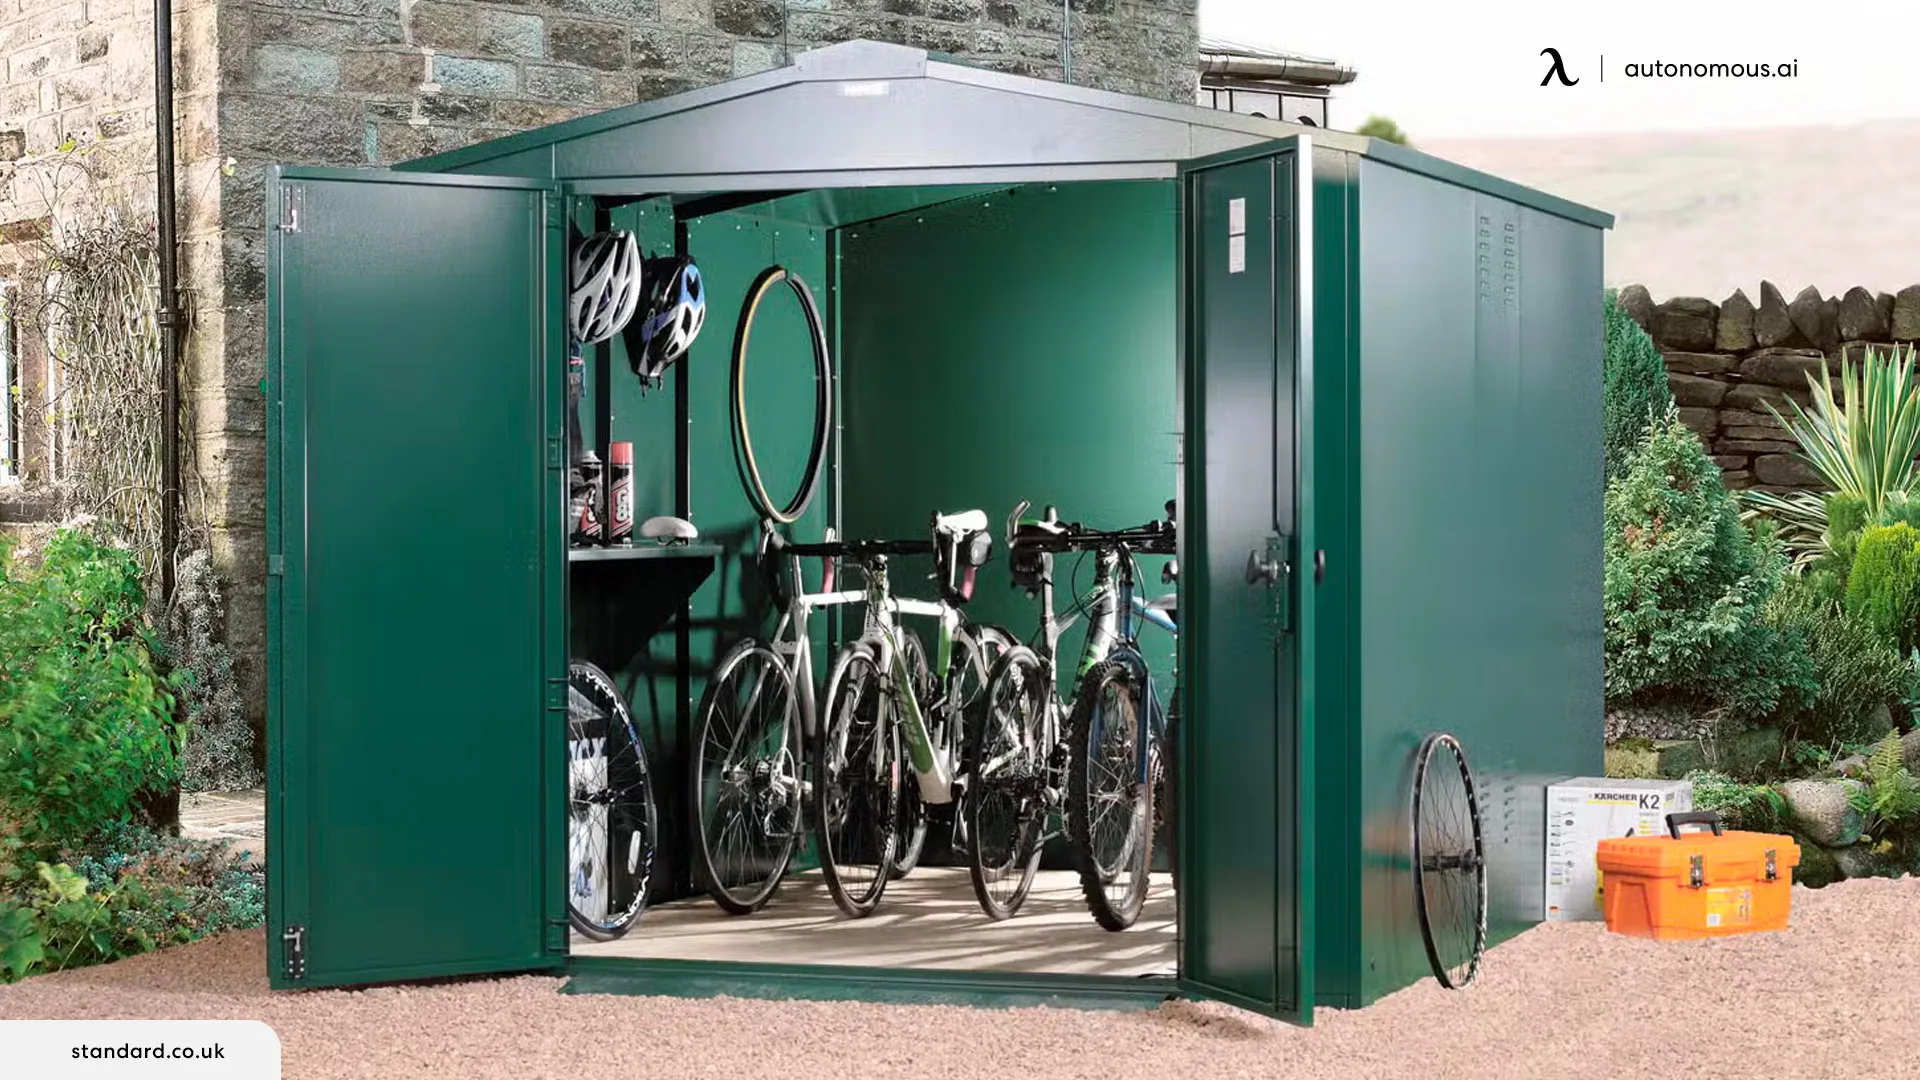 A Comprehensive Guide to Finding the Best Bike Shed in 2023